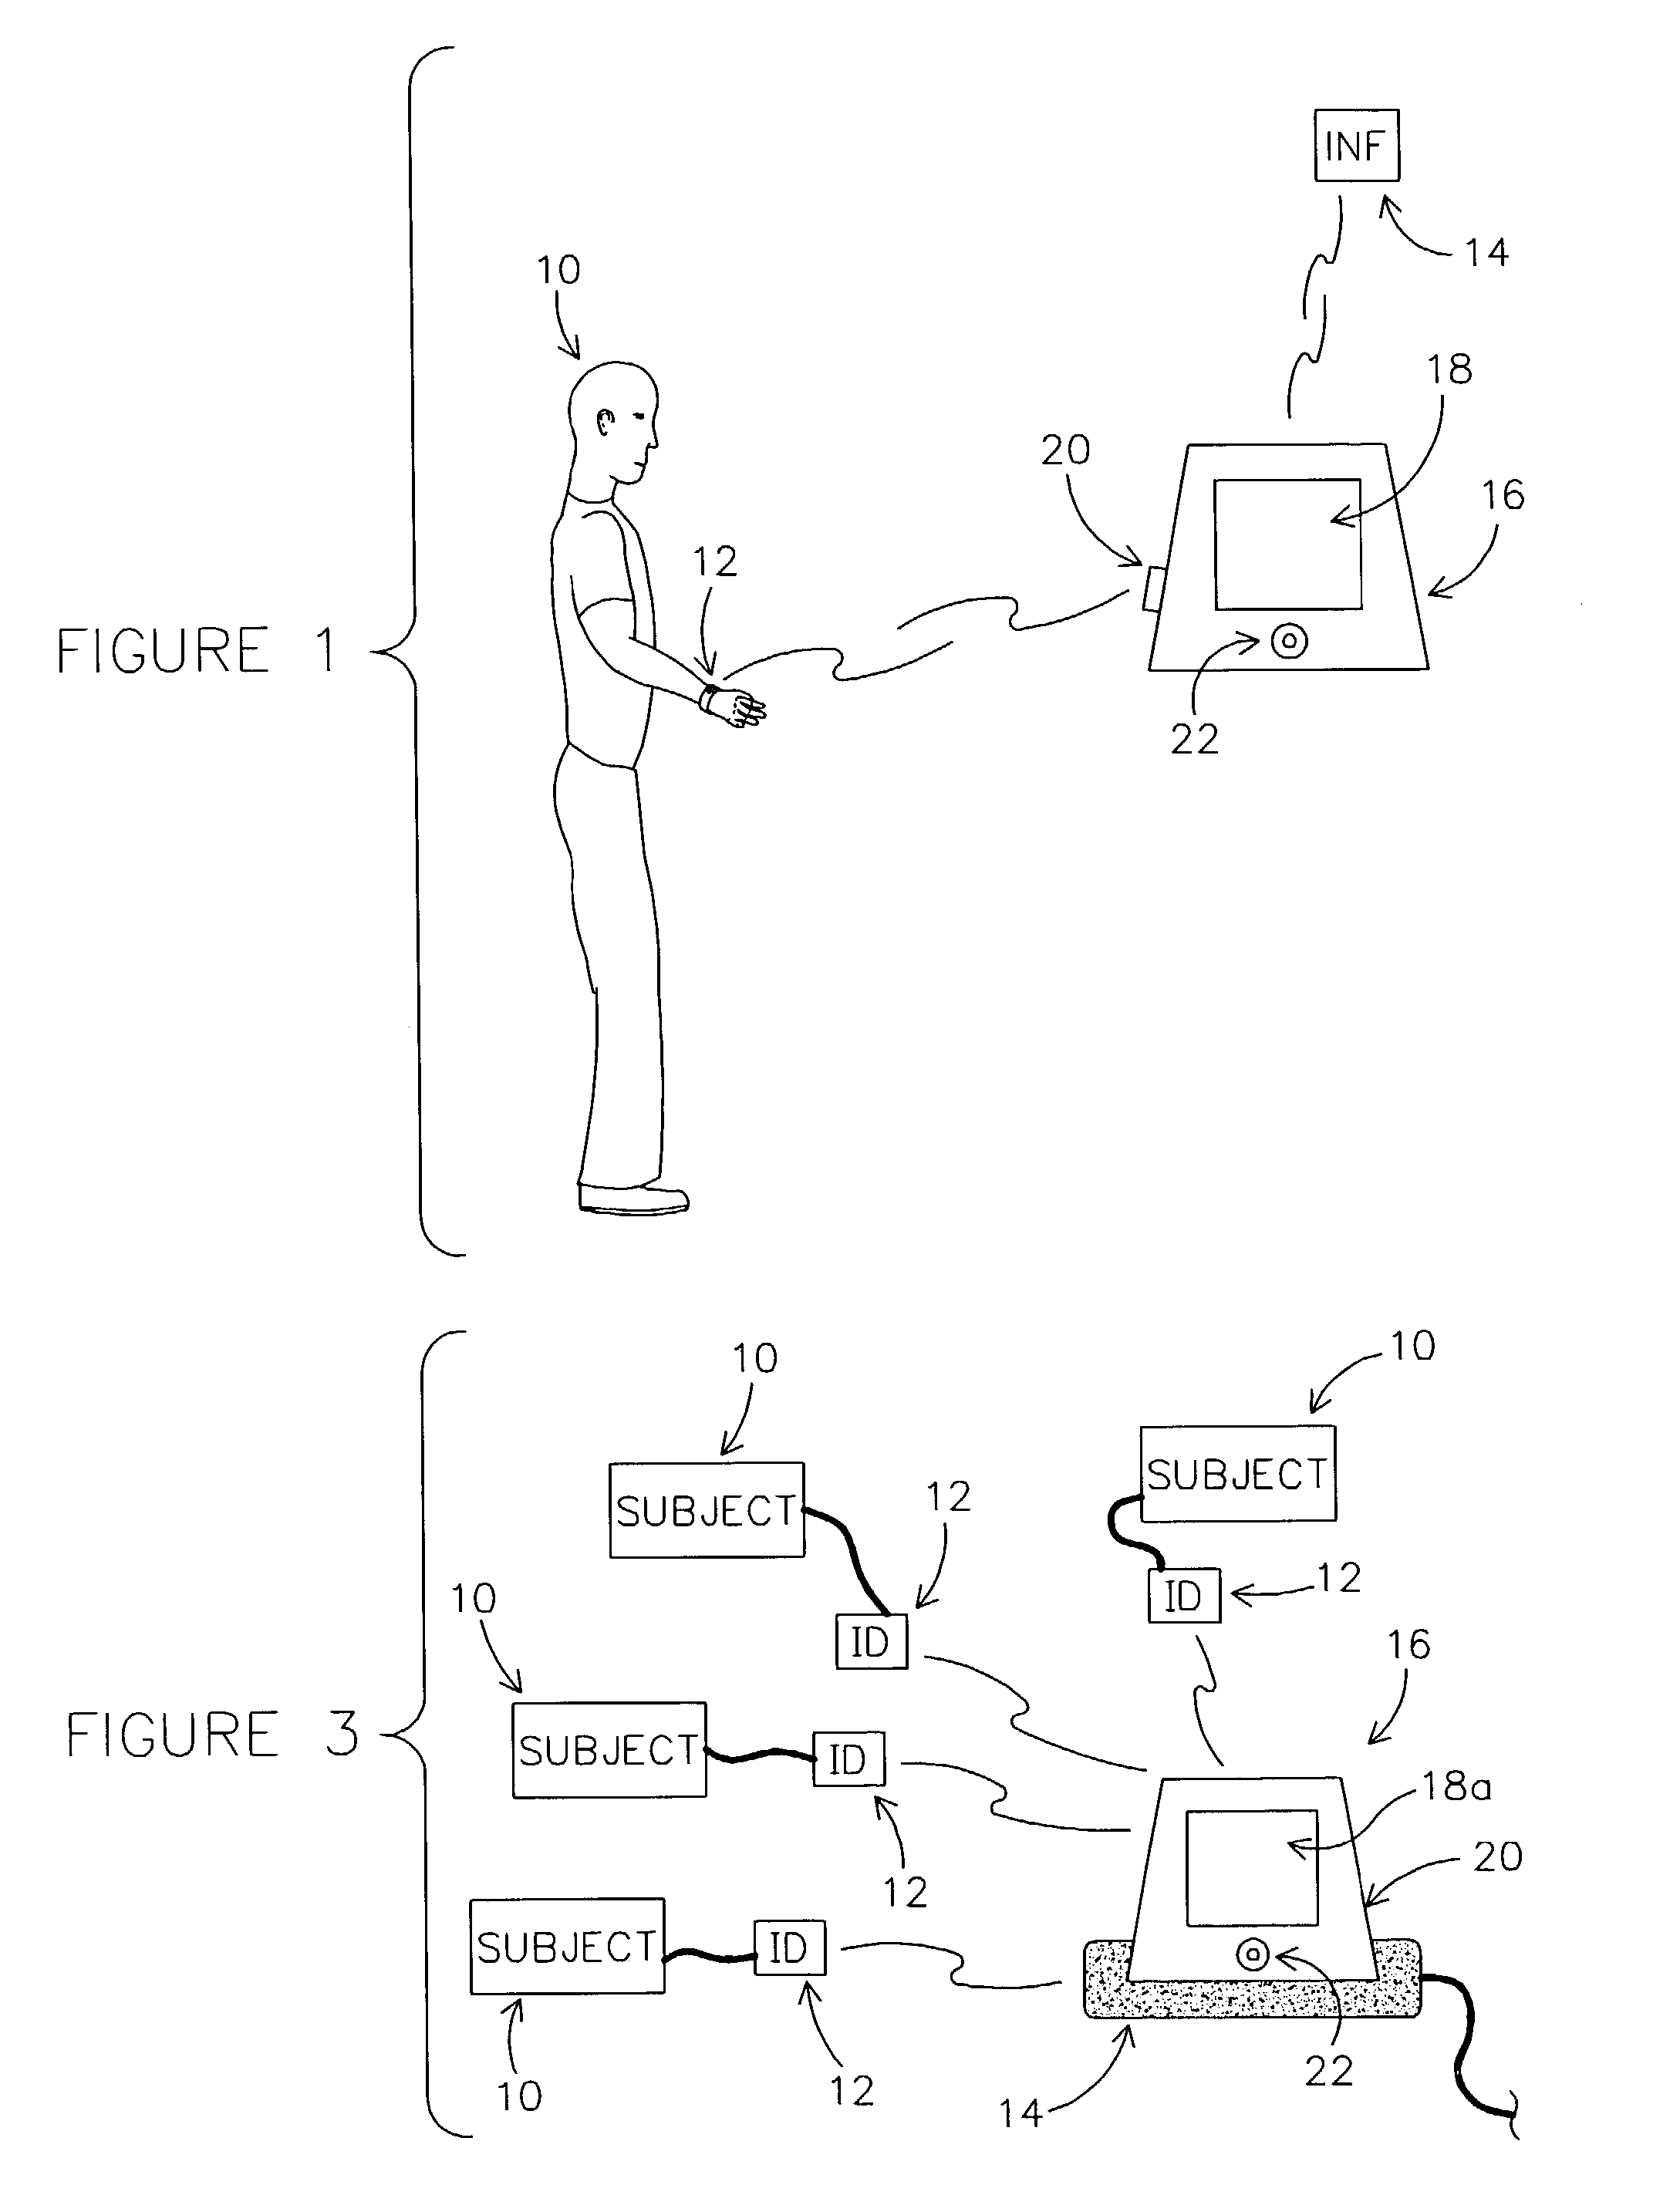 Method and apparatus for identifying a patient